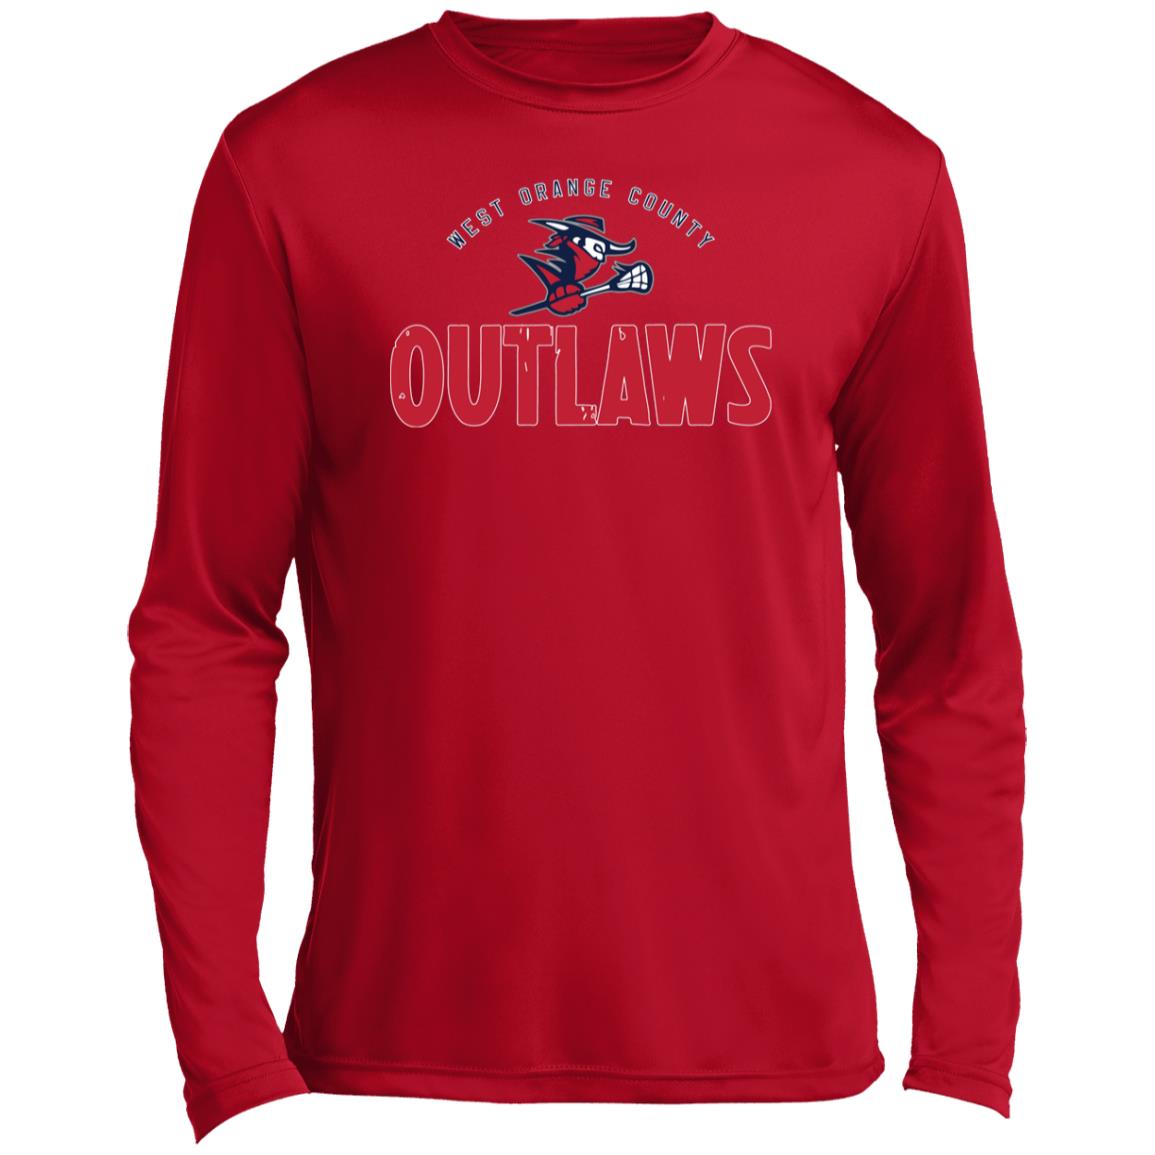 Outlaws Men’s Long Sleeve Performance Tee